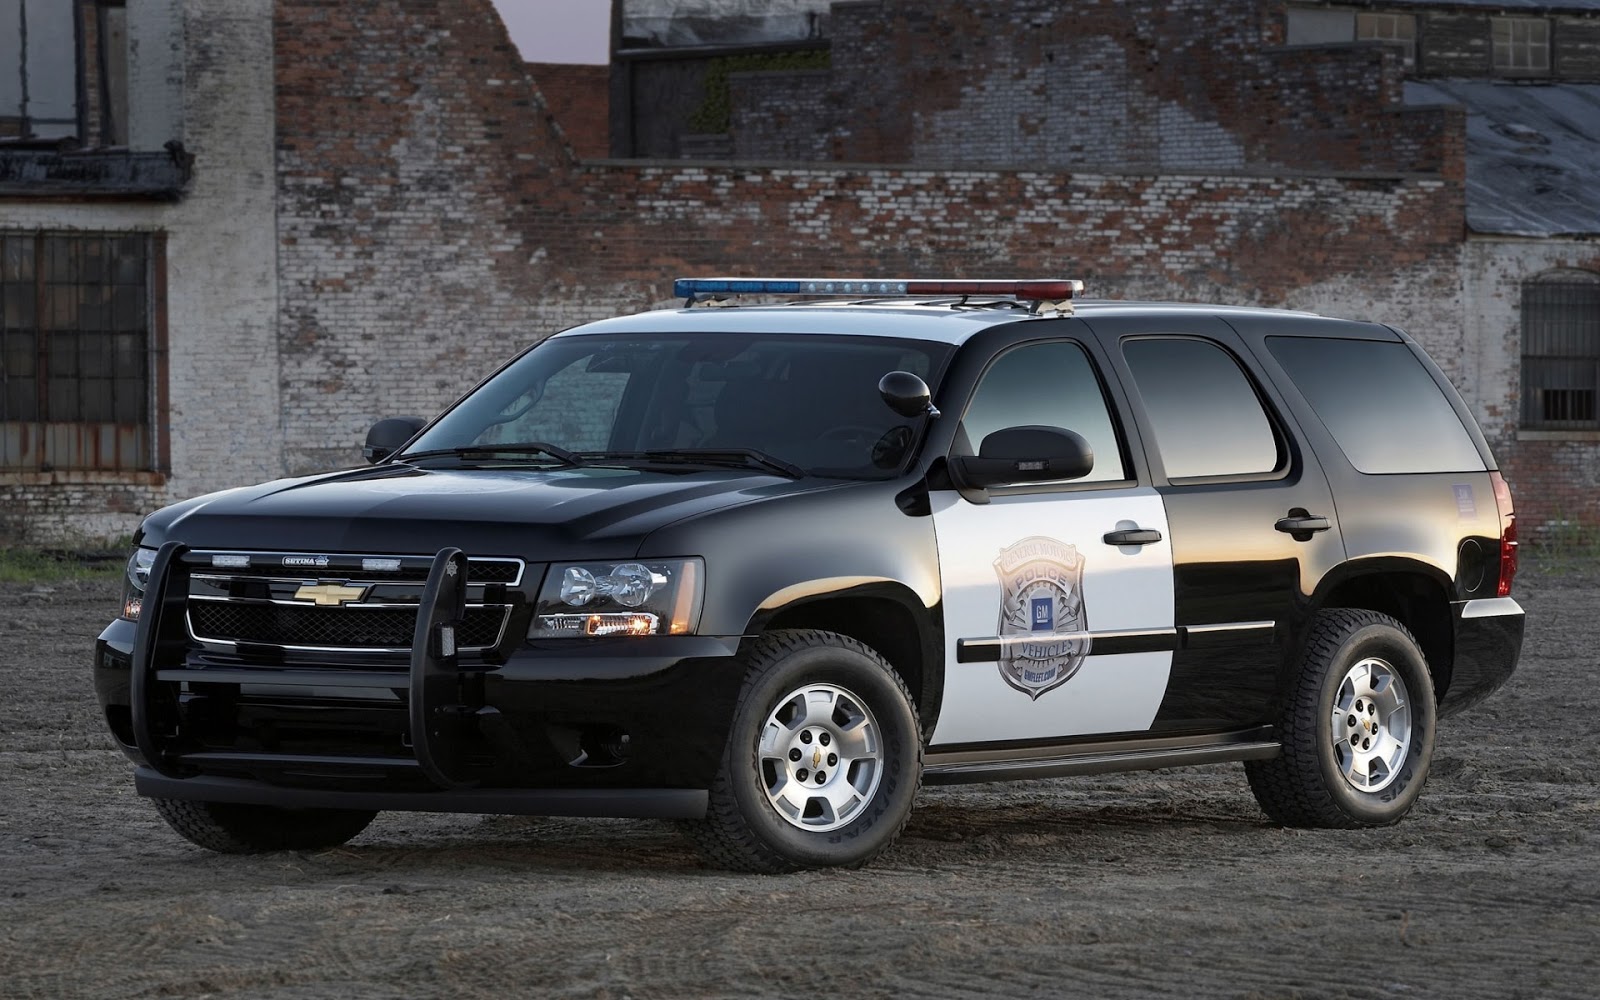 Wallpaper Name Chevrolet Jeep Police Best Resolution